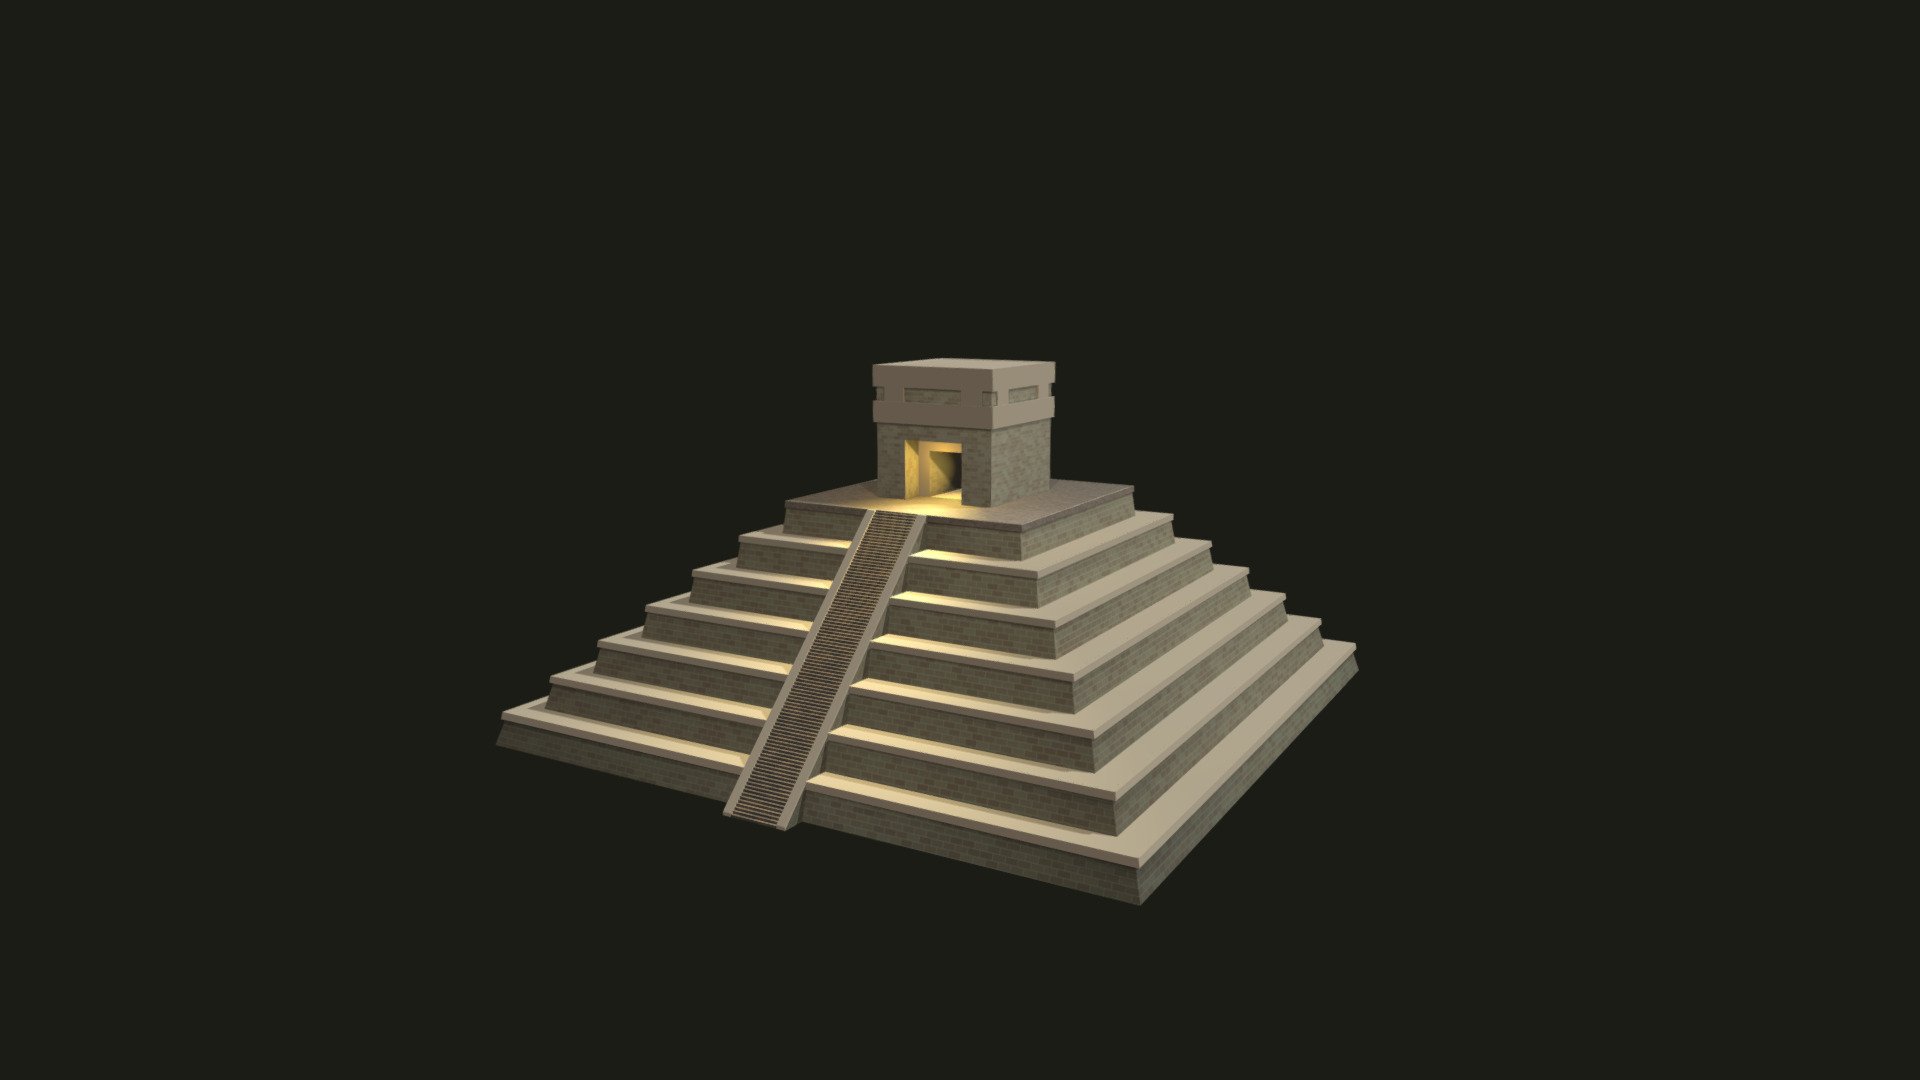 This is the 3D model of a Mayan Pyramid. It would fit great in a jungle! 
Made in Blender.

Visit my Instagram art account 3d model